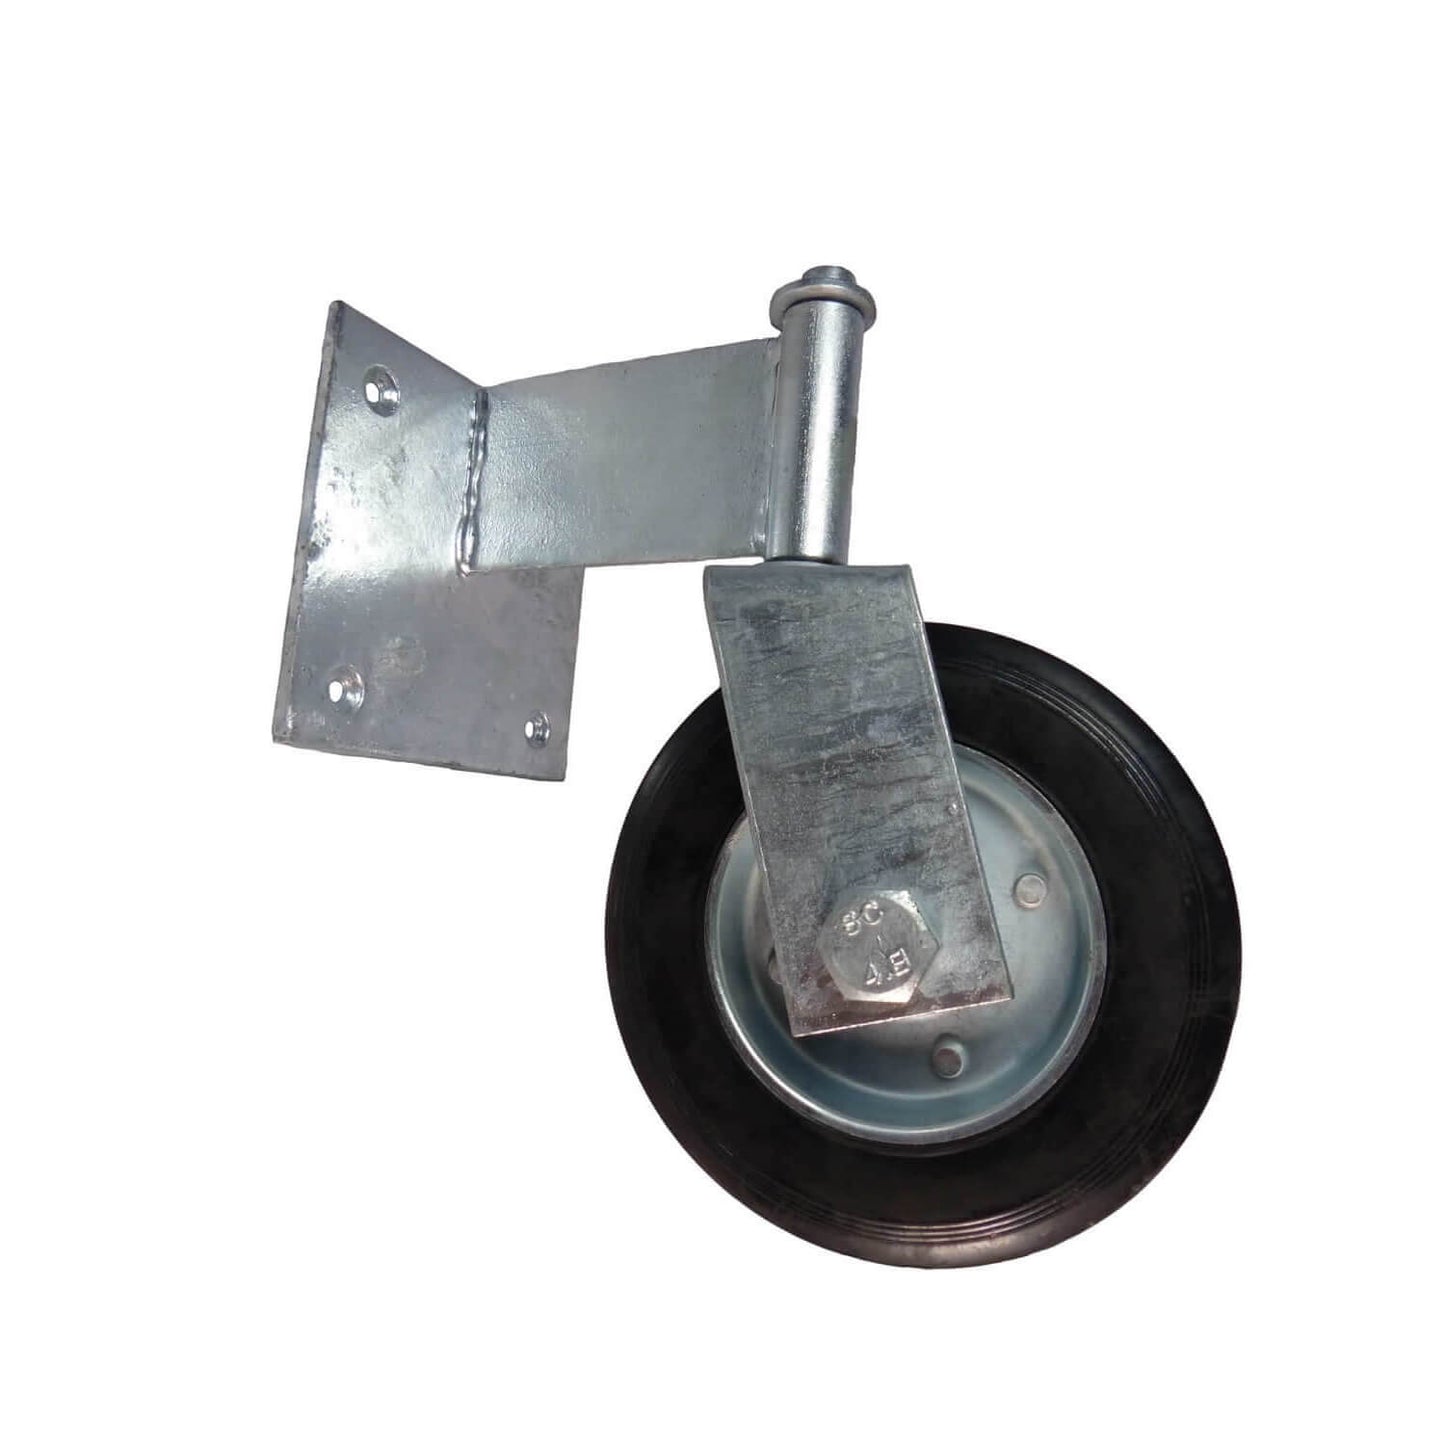 Swivel Wheel for Swinging Wood Gate. Galvanized Steel guards against rusting. Product is easy to install